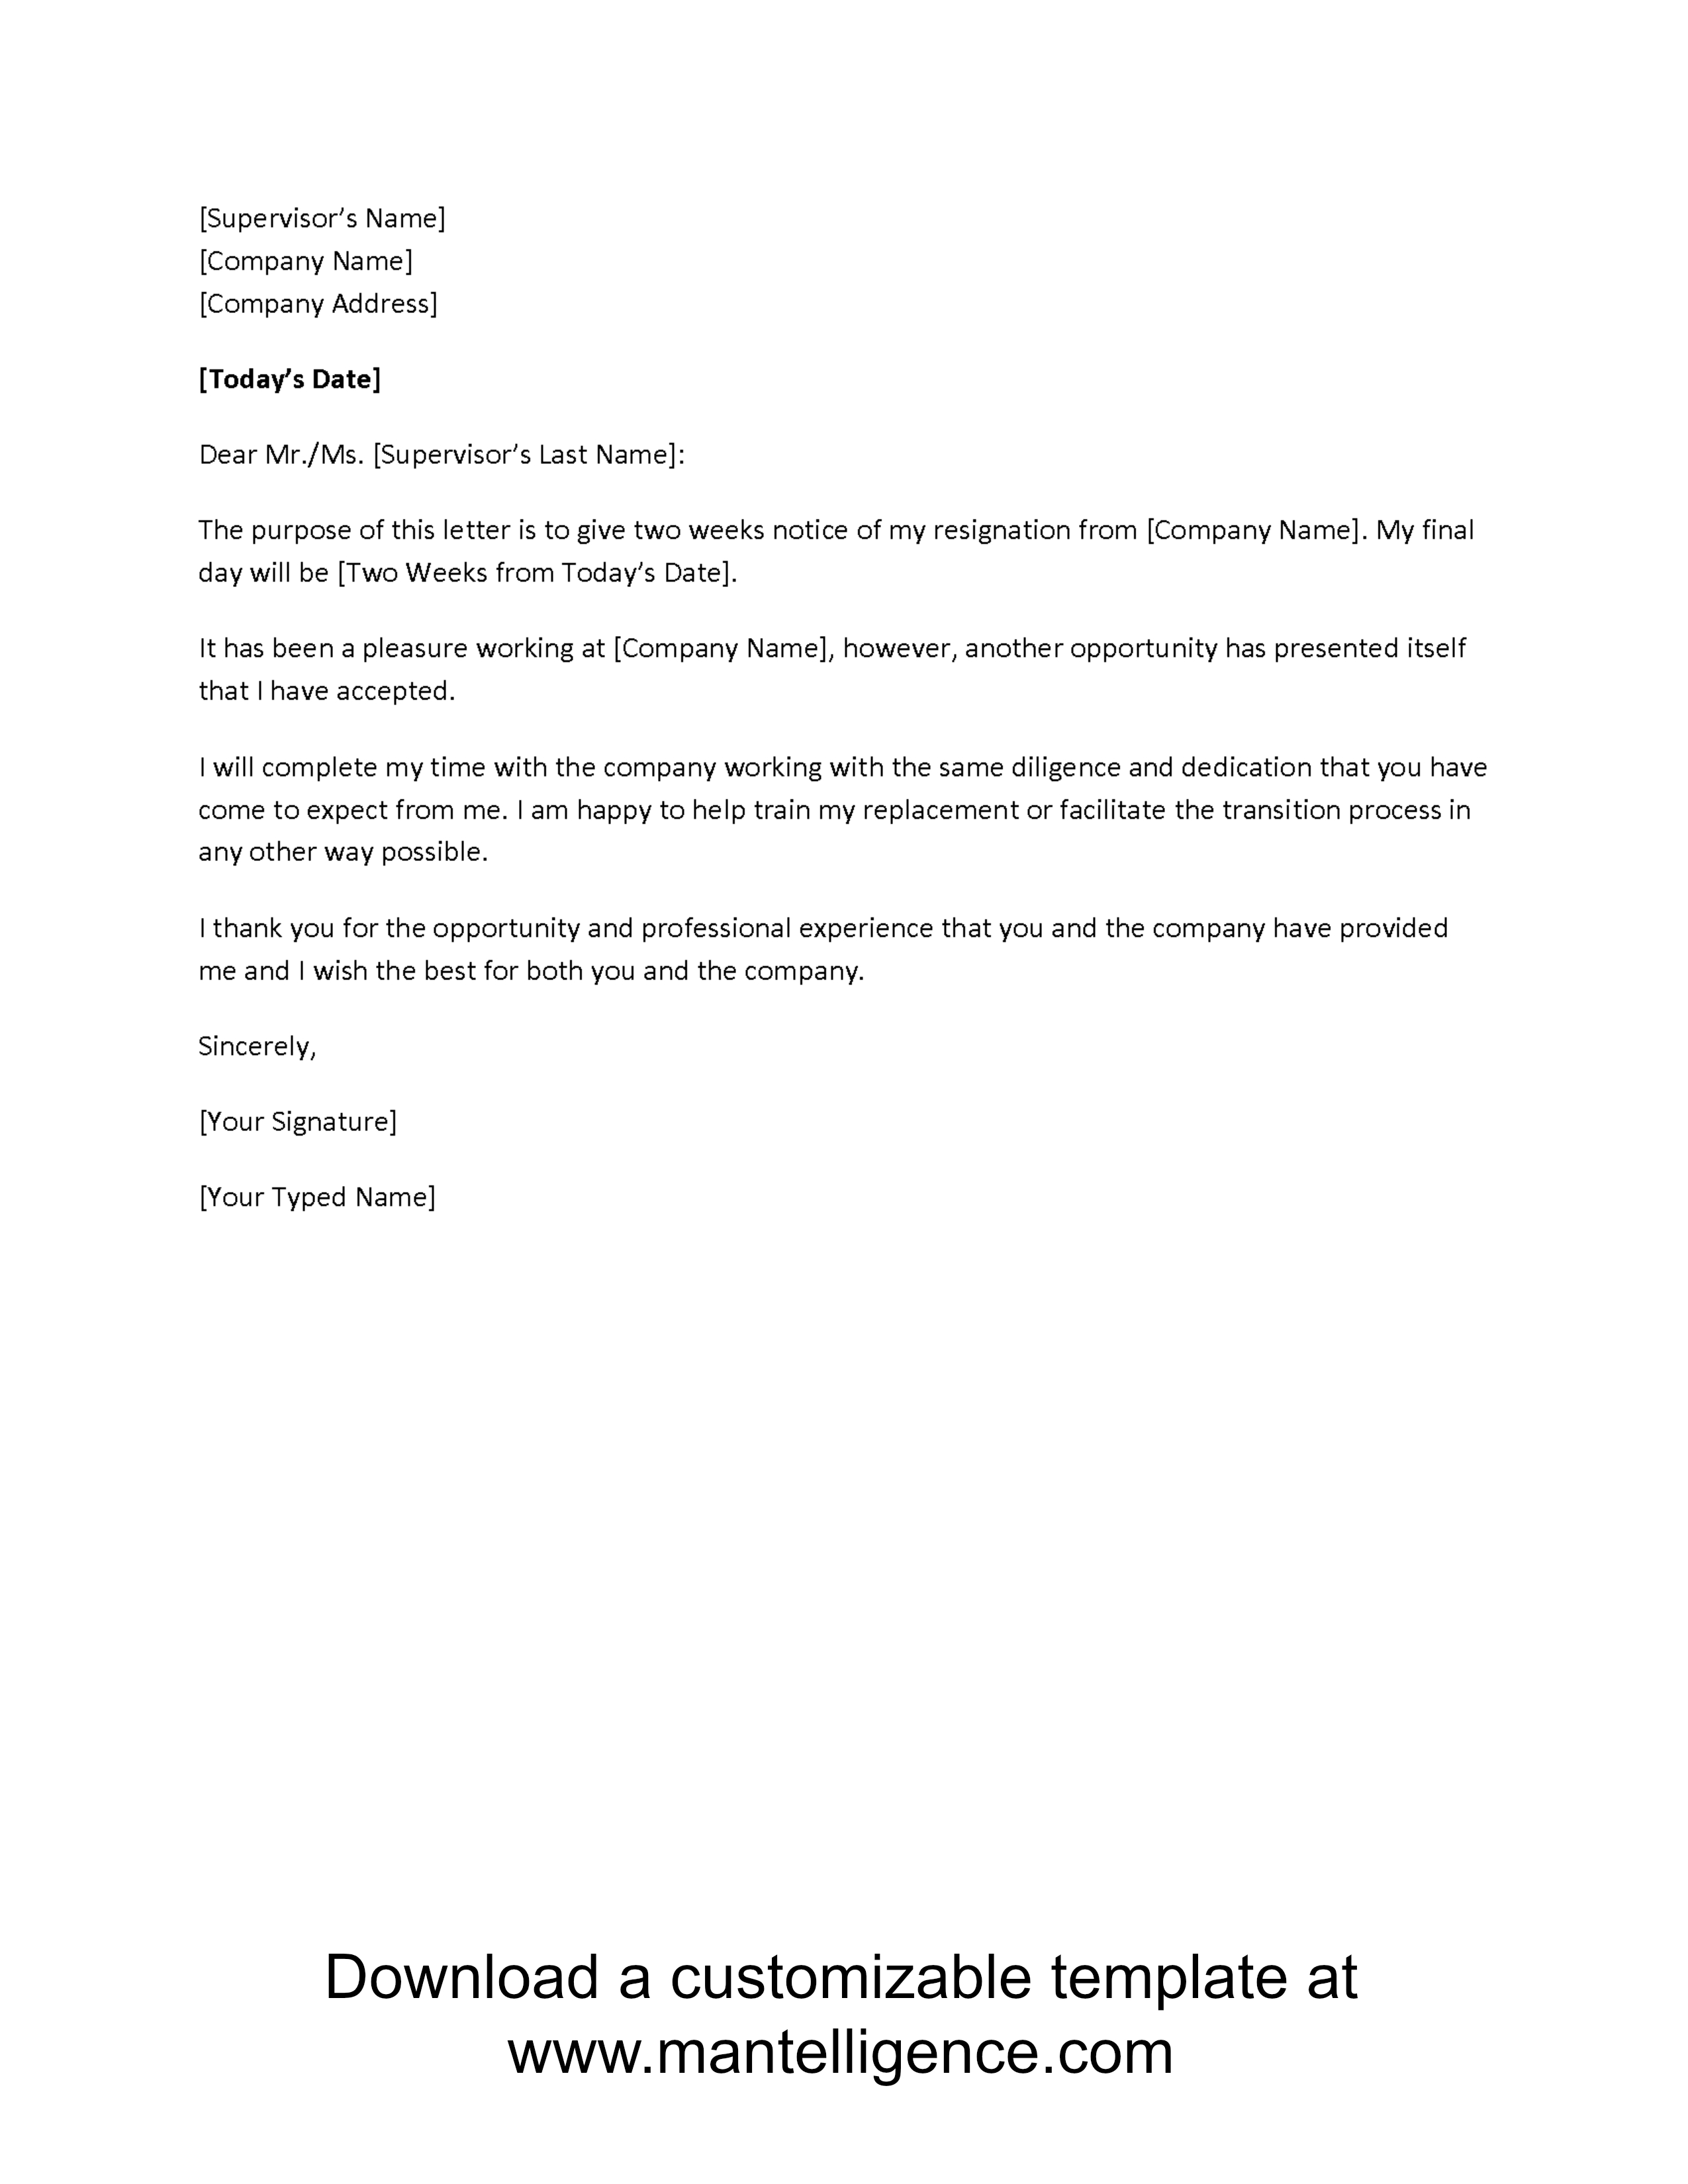 Medical Emergency Letter Template - 3 Highly Professional Two Weeks Notice Letter Templates